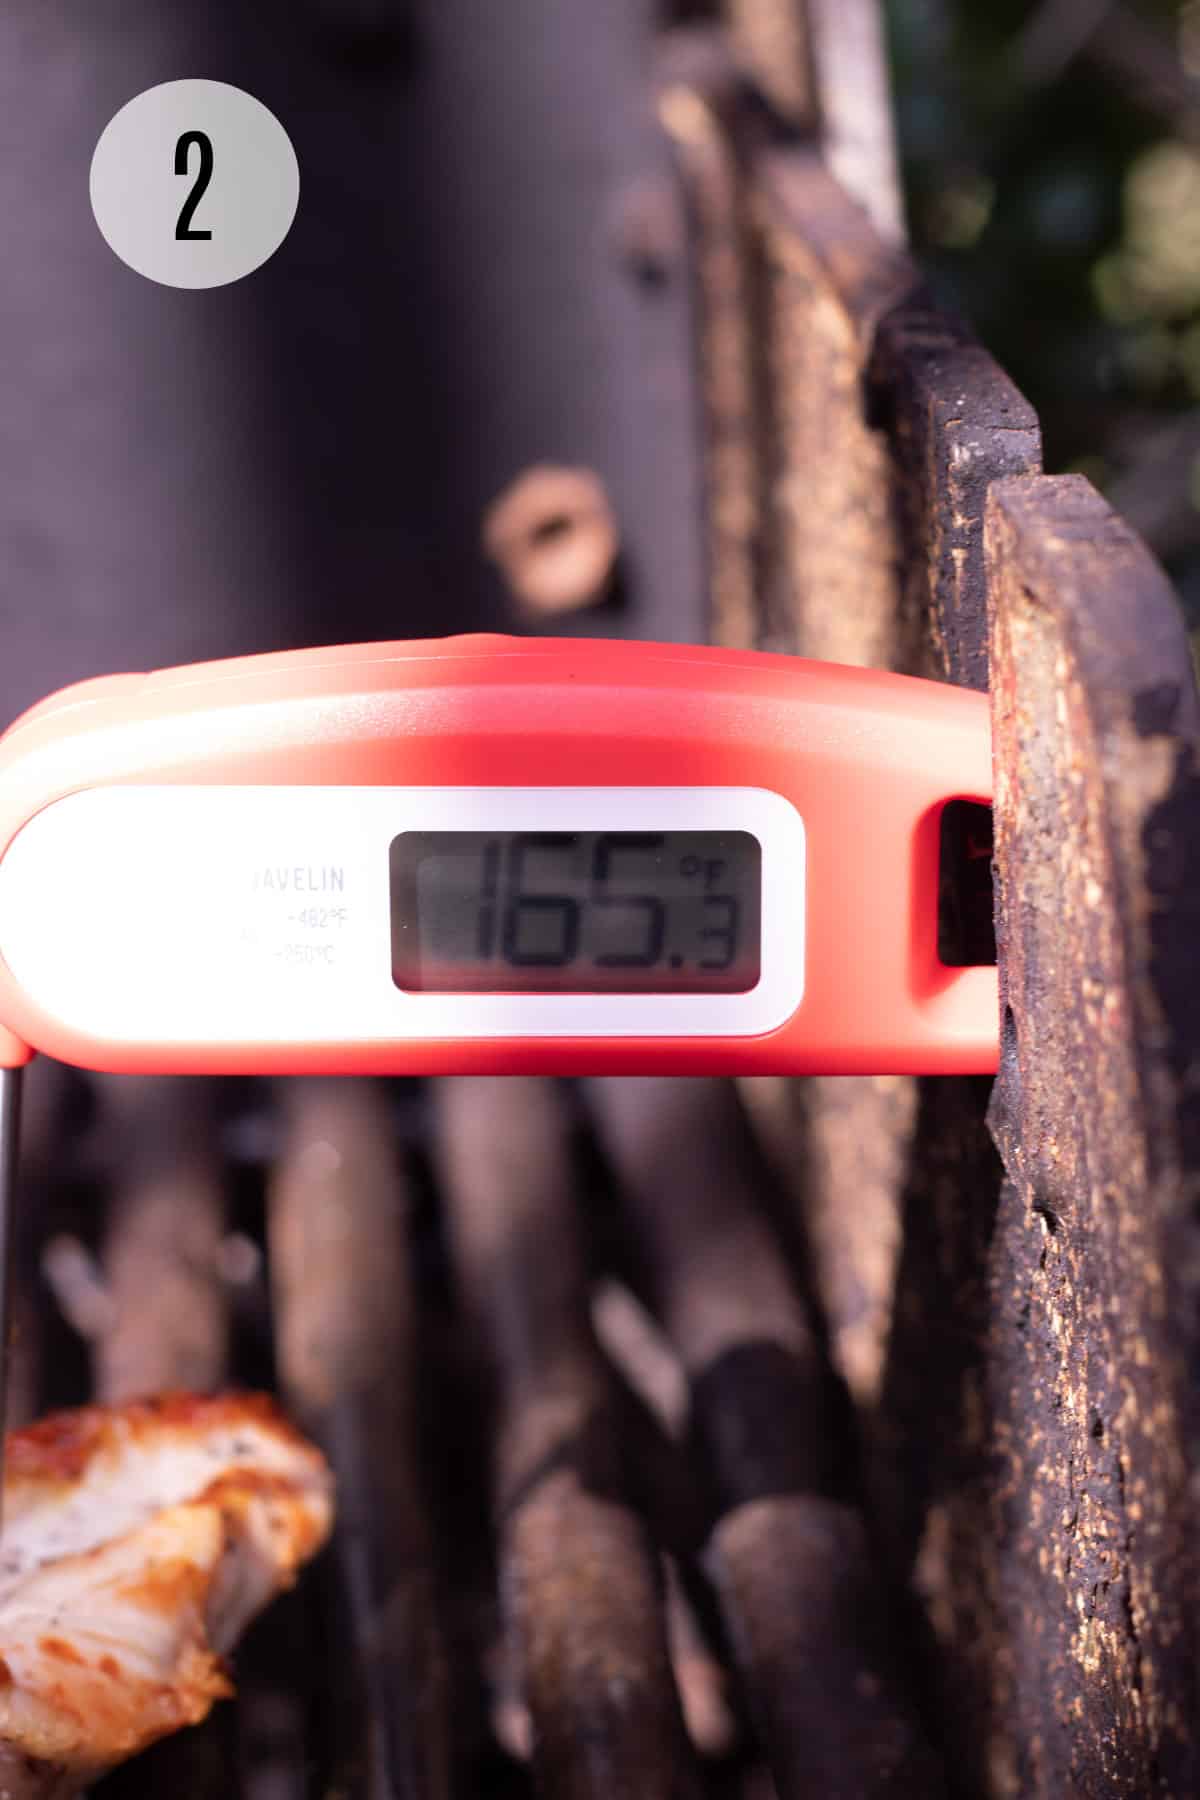 Close up image of a red and white food safe digital thermometer being used on meat on a grill. 